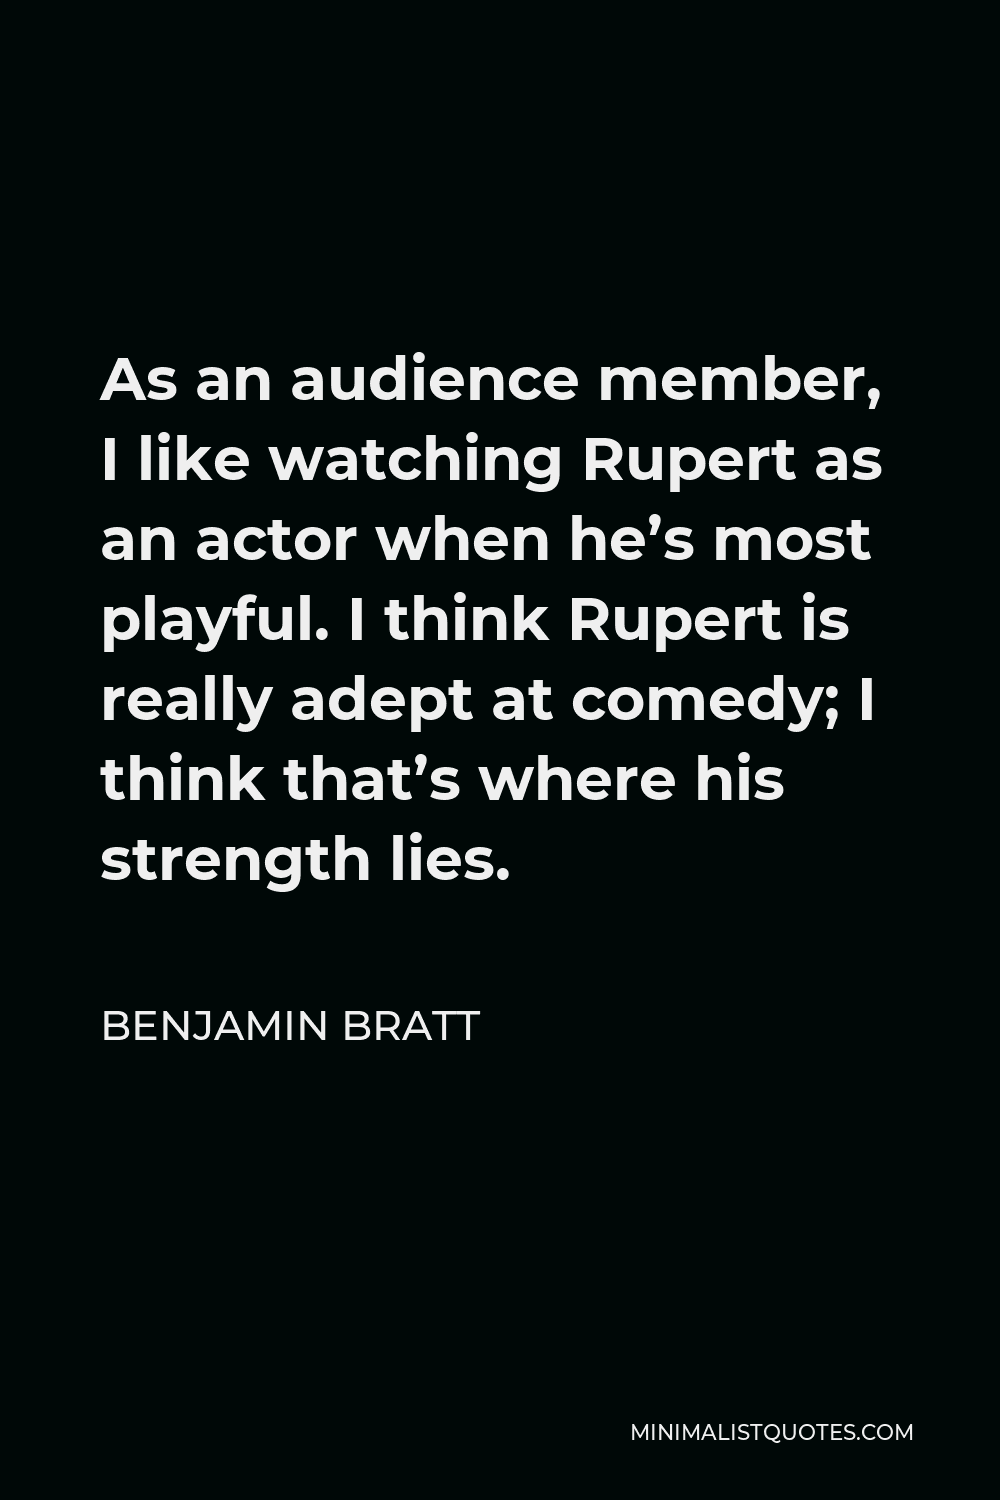 Benjamin Bratt Quote - As an audience member, I like watching Rupert as an actor when he’s most playful. I think Rupert is really adept at comedy; I think that’s where his strength lies.